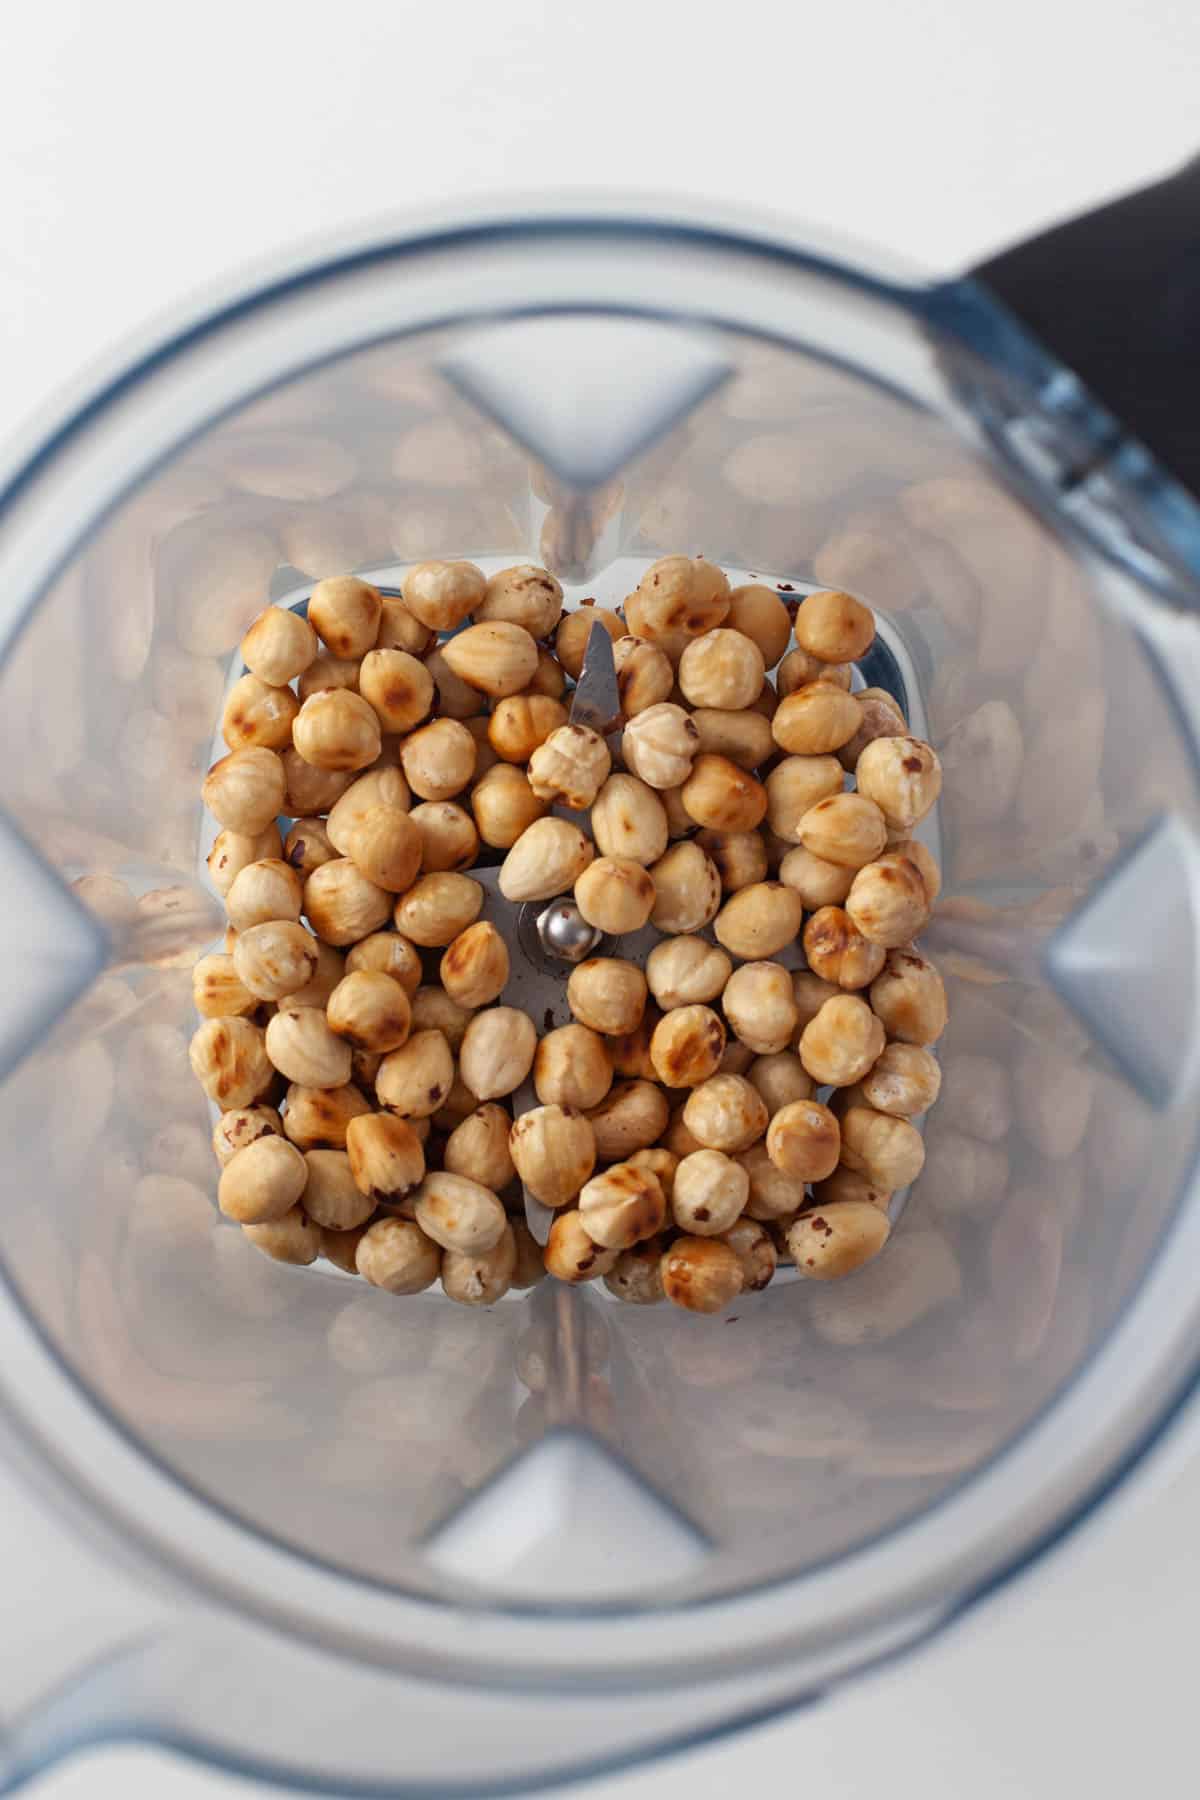 Toasted hazelnuts in a blender.